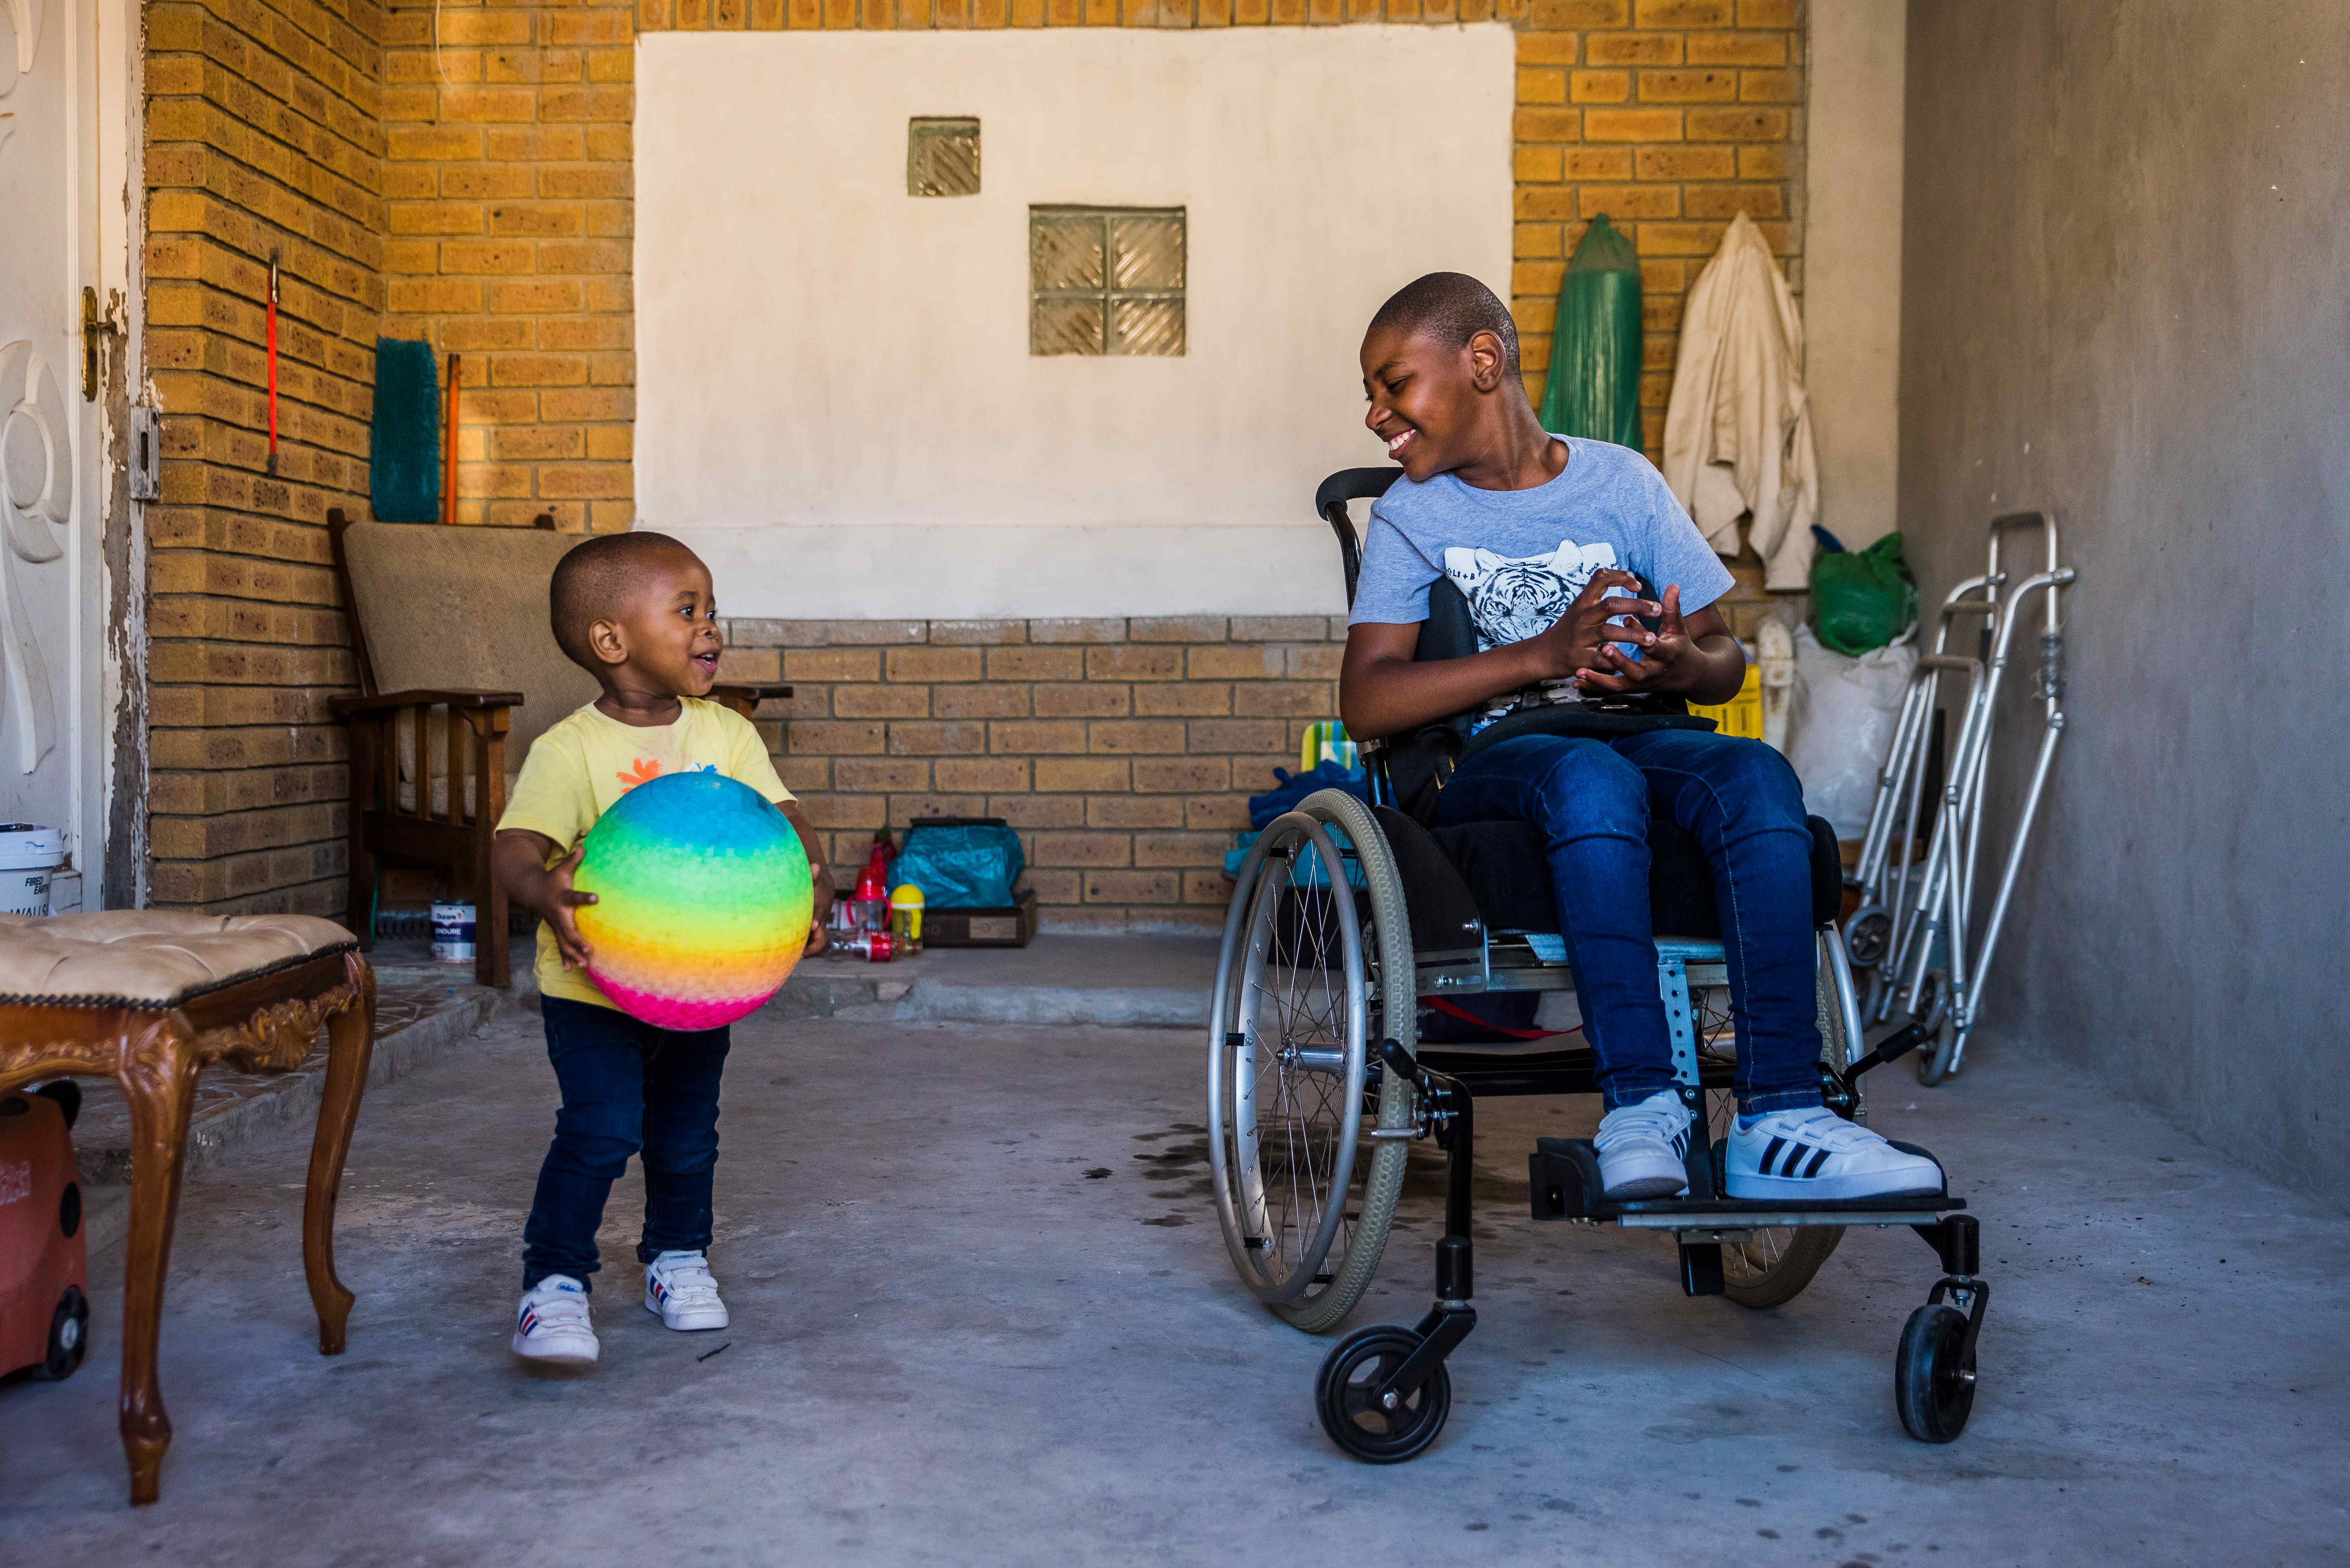 Image of two children playing with a ball, both are smiling and both are using wheelchairs Cover Image